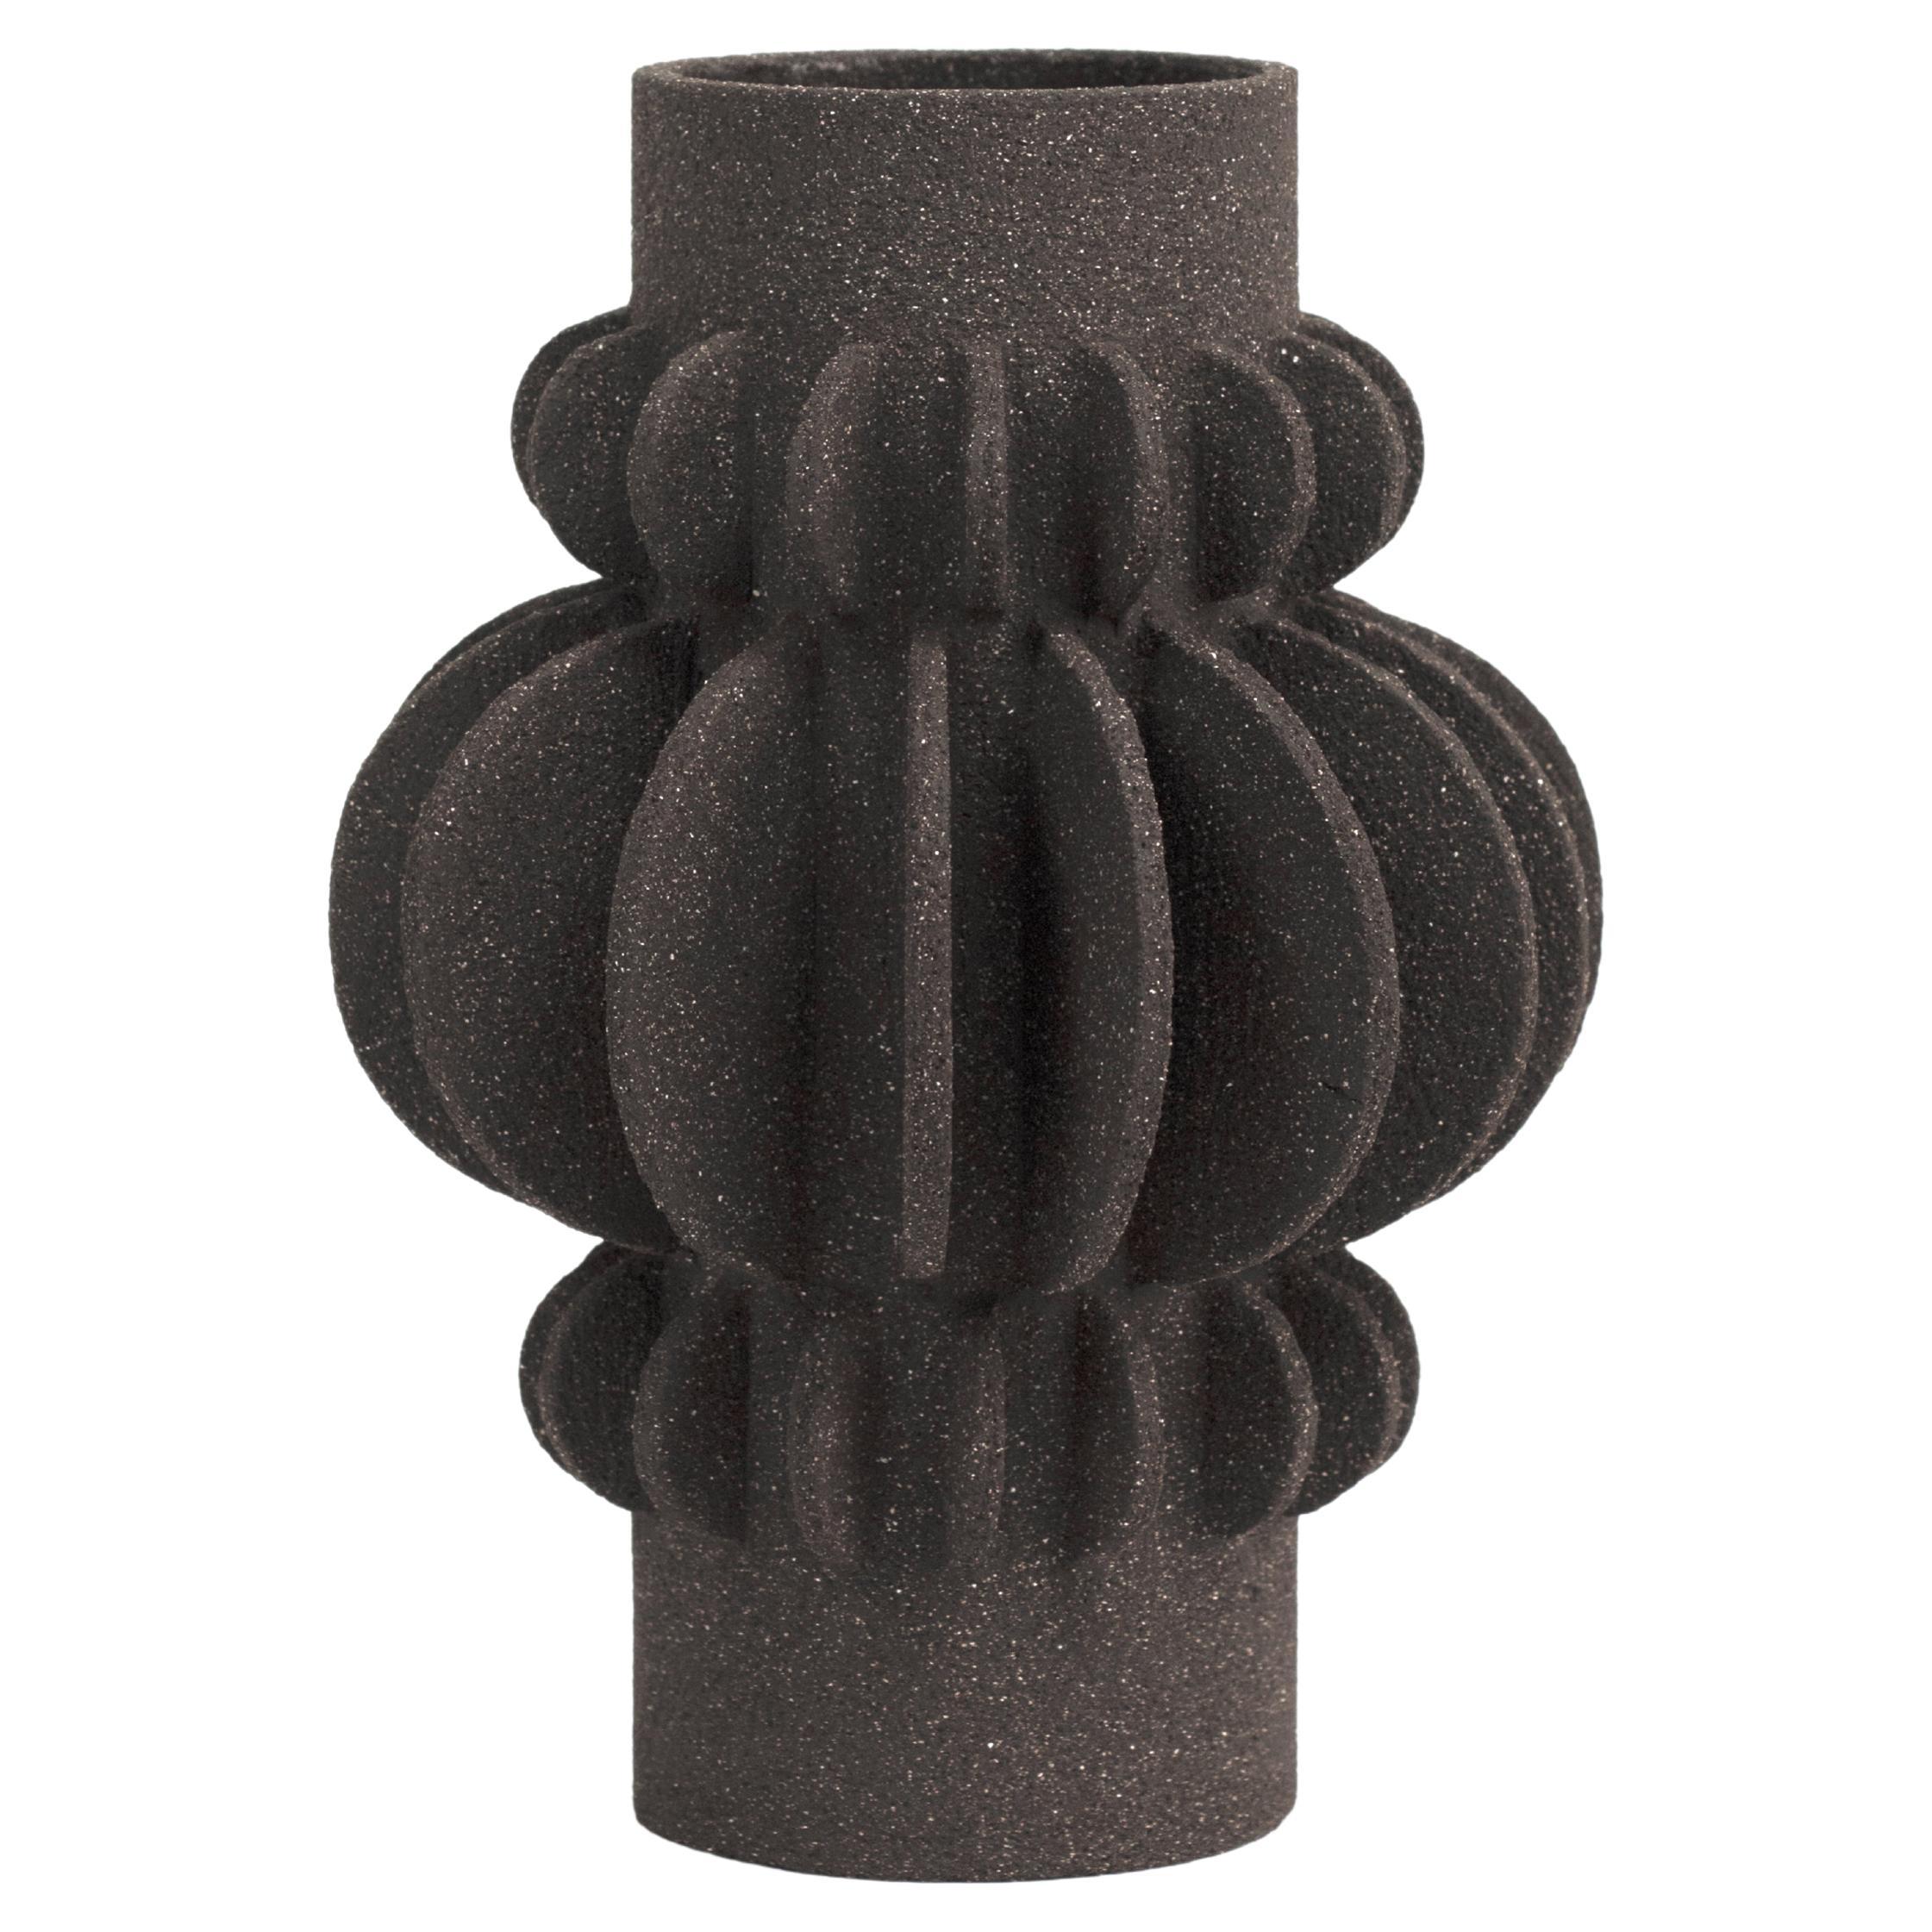 21st Century Triple Mille-Pattes Vase in Black Ceramic, Hand-Crafted in France